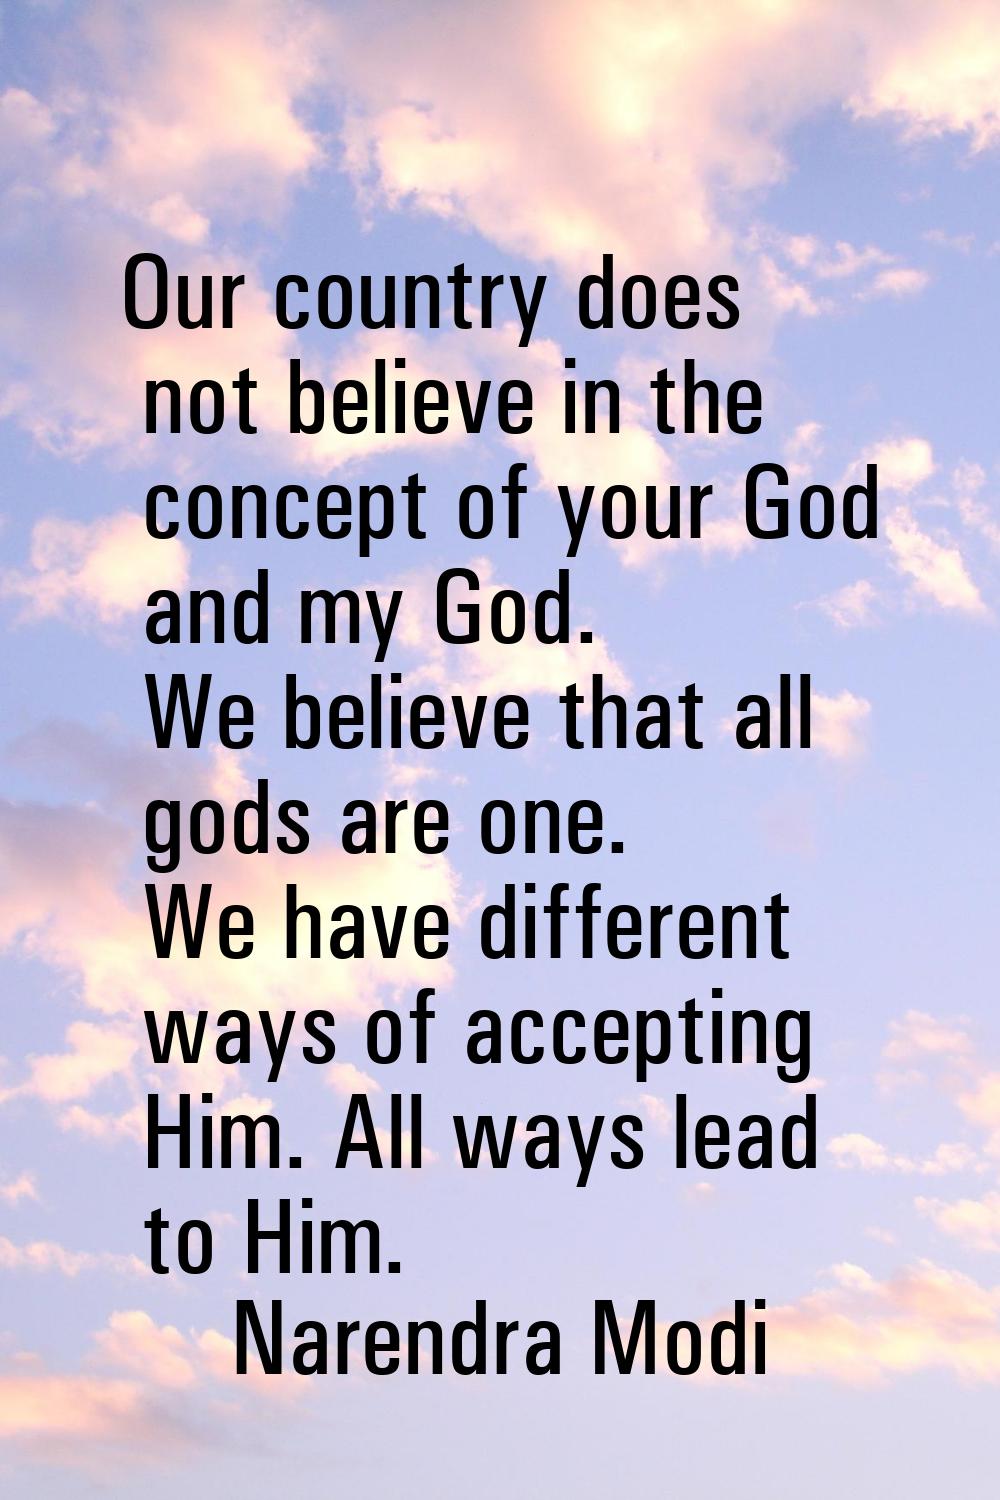 Our country does not believe in the concept of your God and my God. We believe that all gods are on